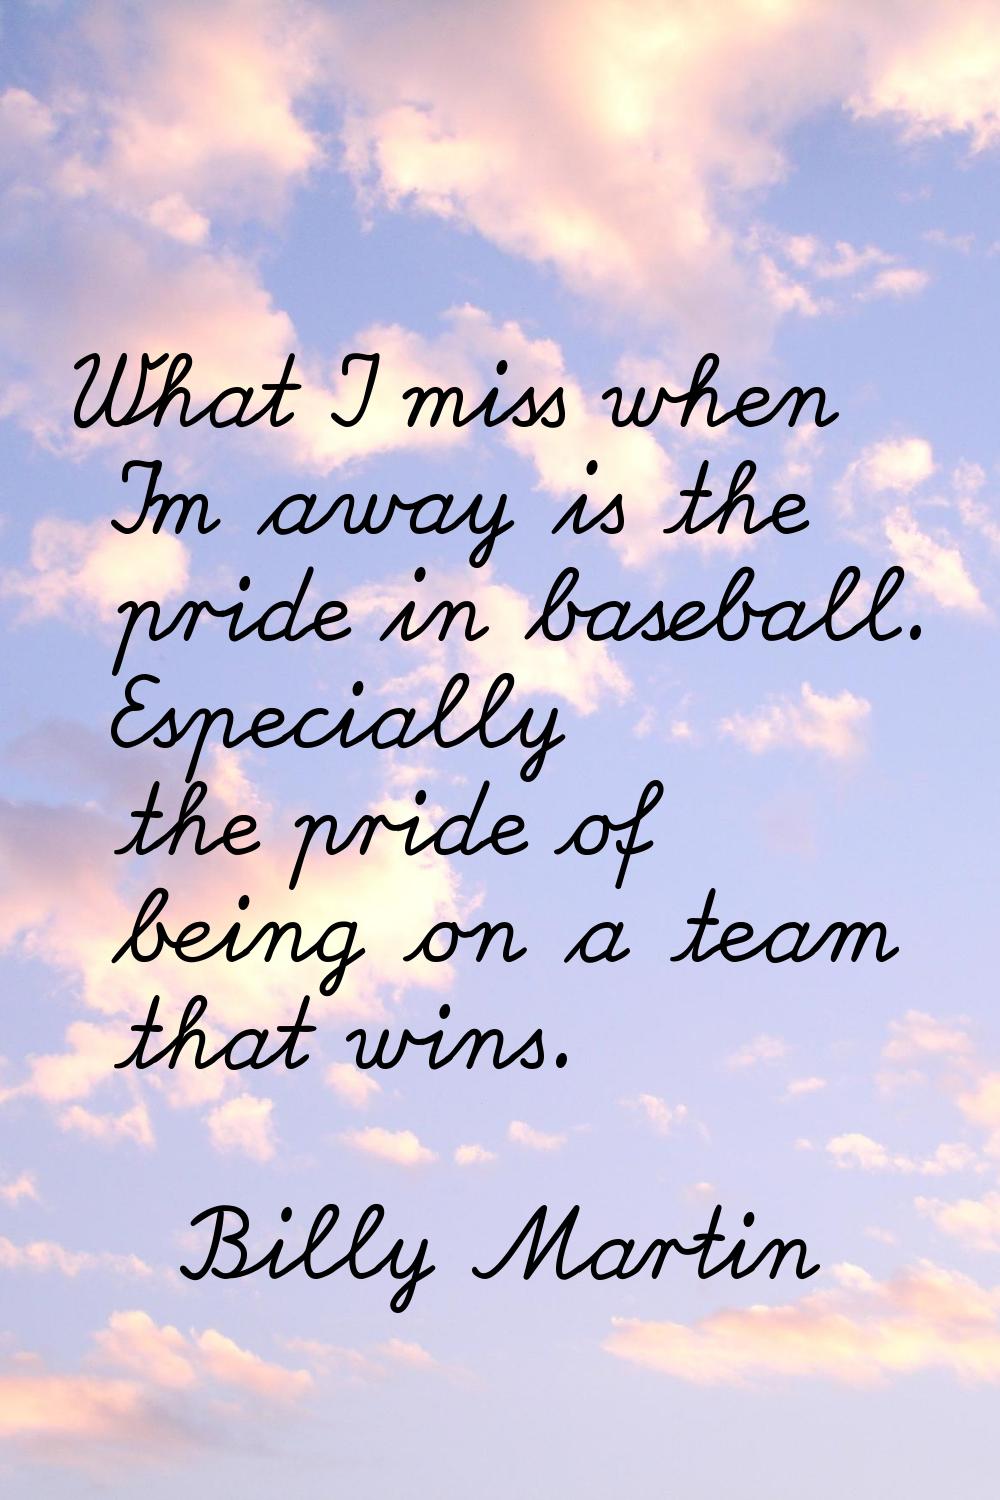 What I miss when I'm away is the pride in baseball. Especially the pride of being on a team that wi